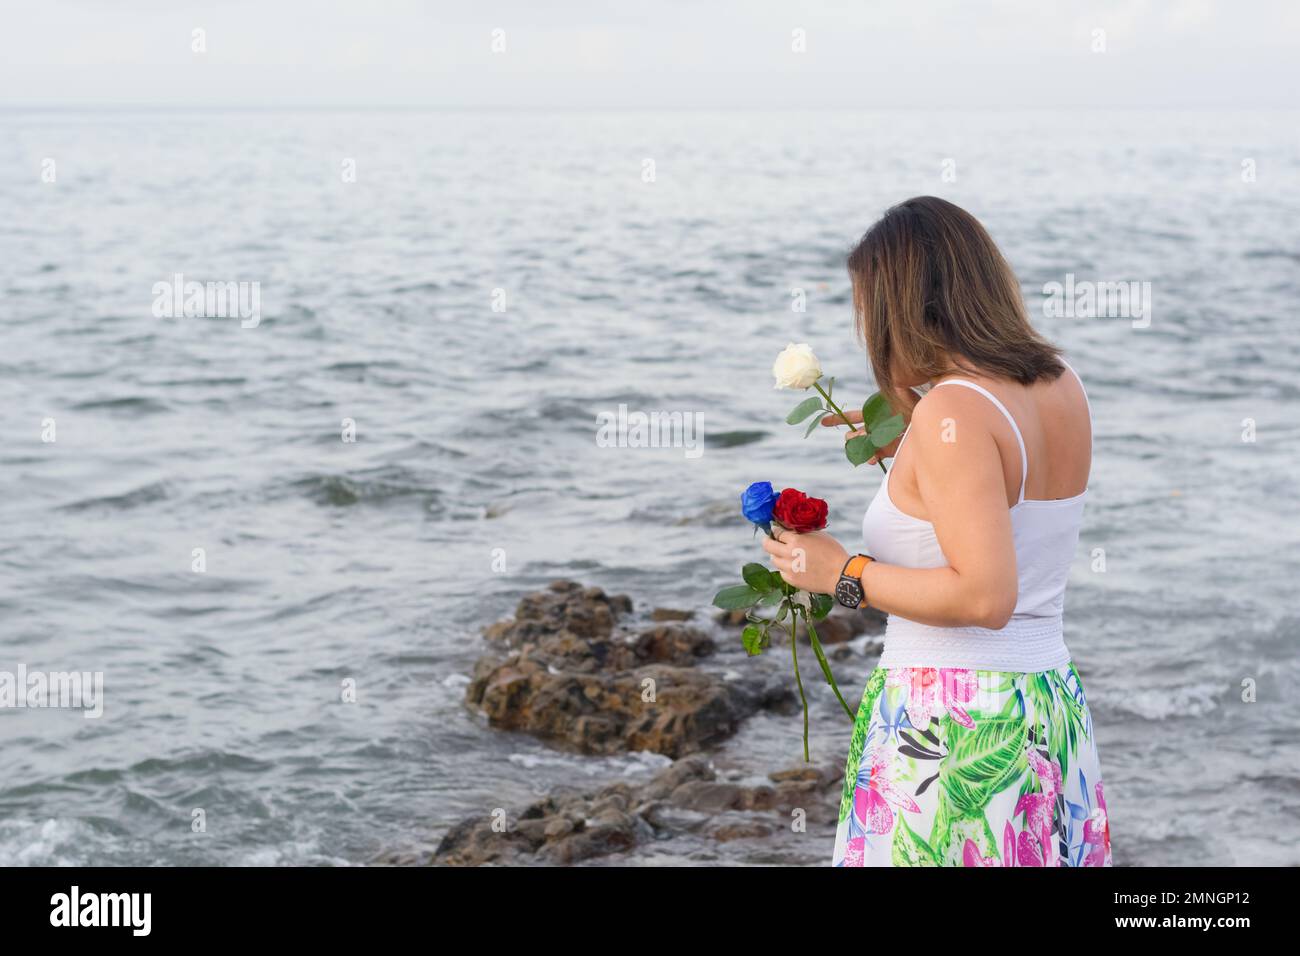 Salvador, Bahia, Brazil - February 02, 2017: A woman who admires Candomble throws flowers into the sea in honor of Iemanja on her feast day. Salvador, Stock Photo